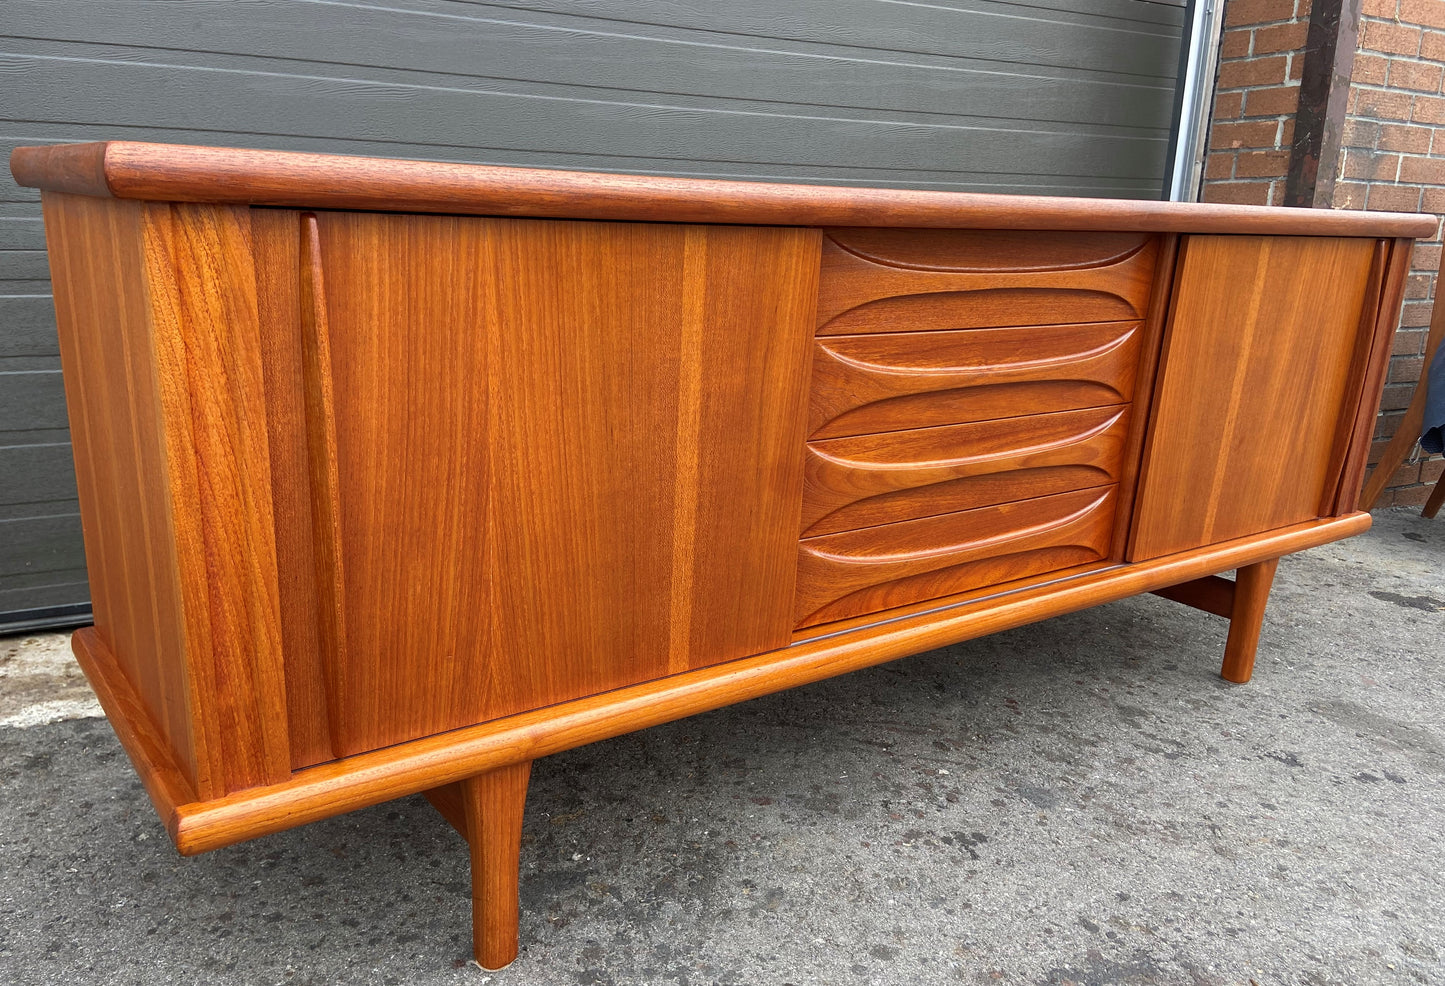 REFINISHED Mid Century Modern Teak Sideboard by Huber 77.75", Perfect